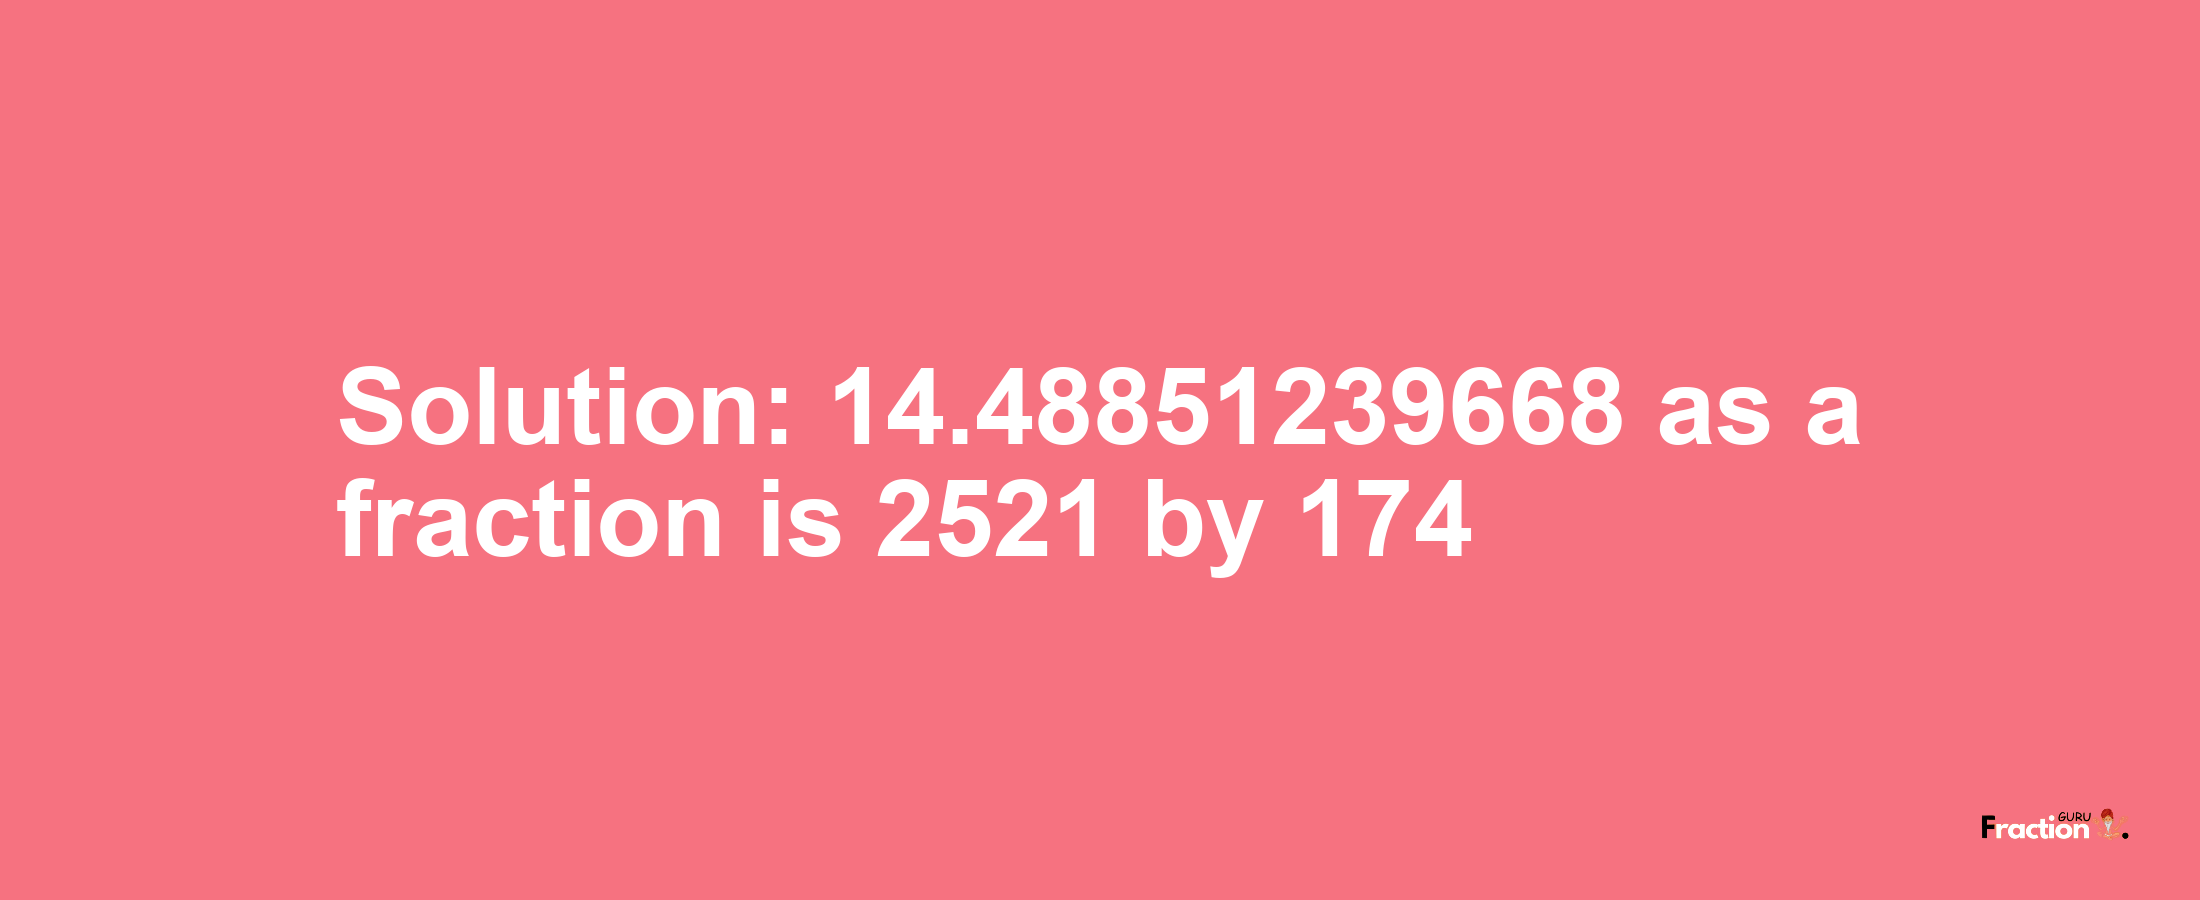 Solution:14.48851239668 as a fraction is 2521/174